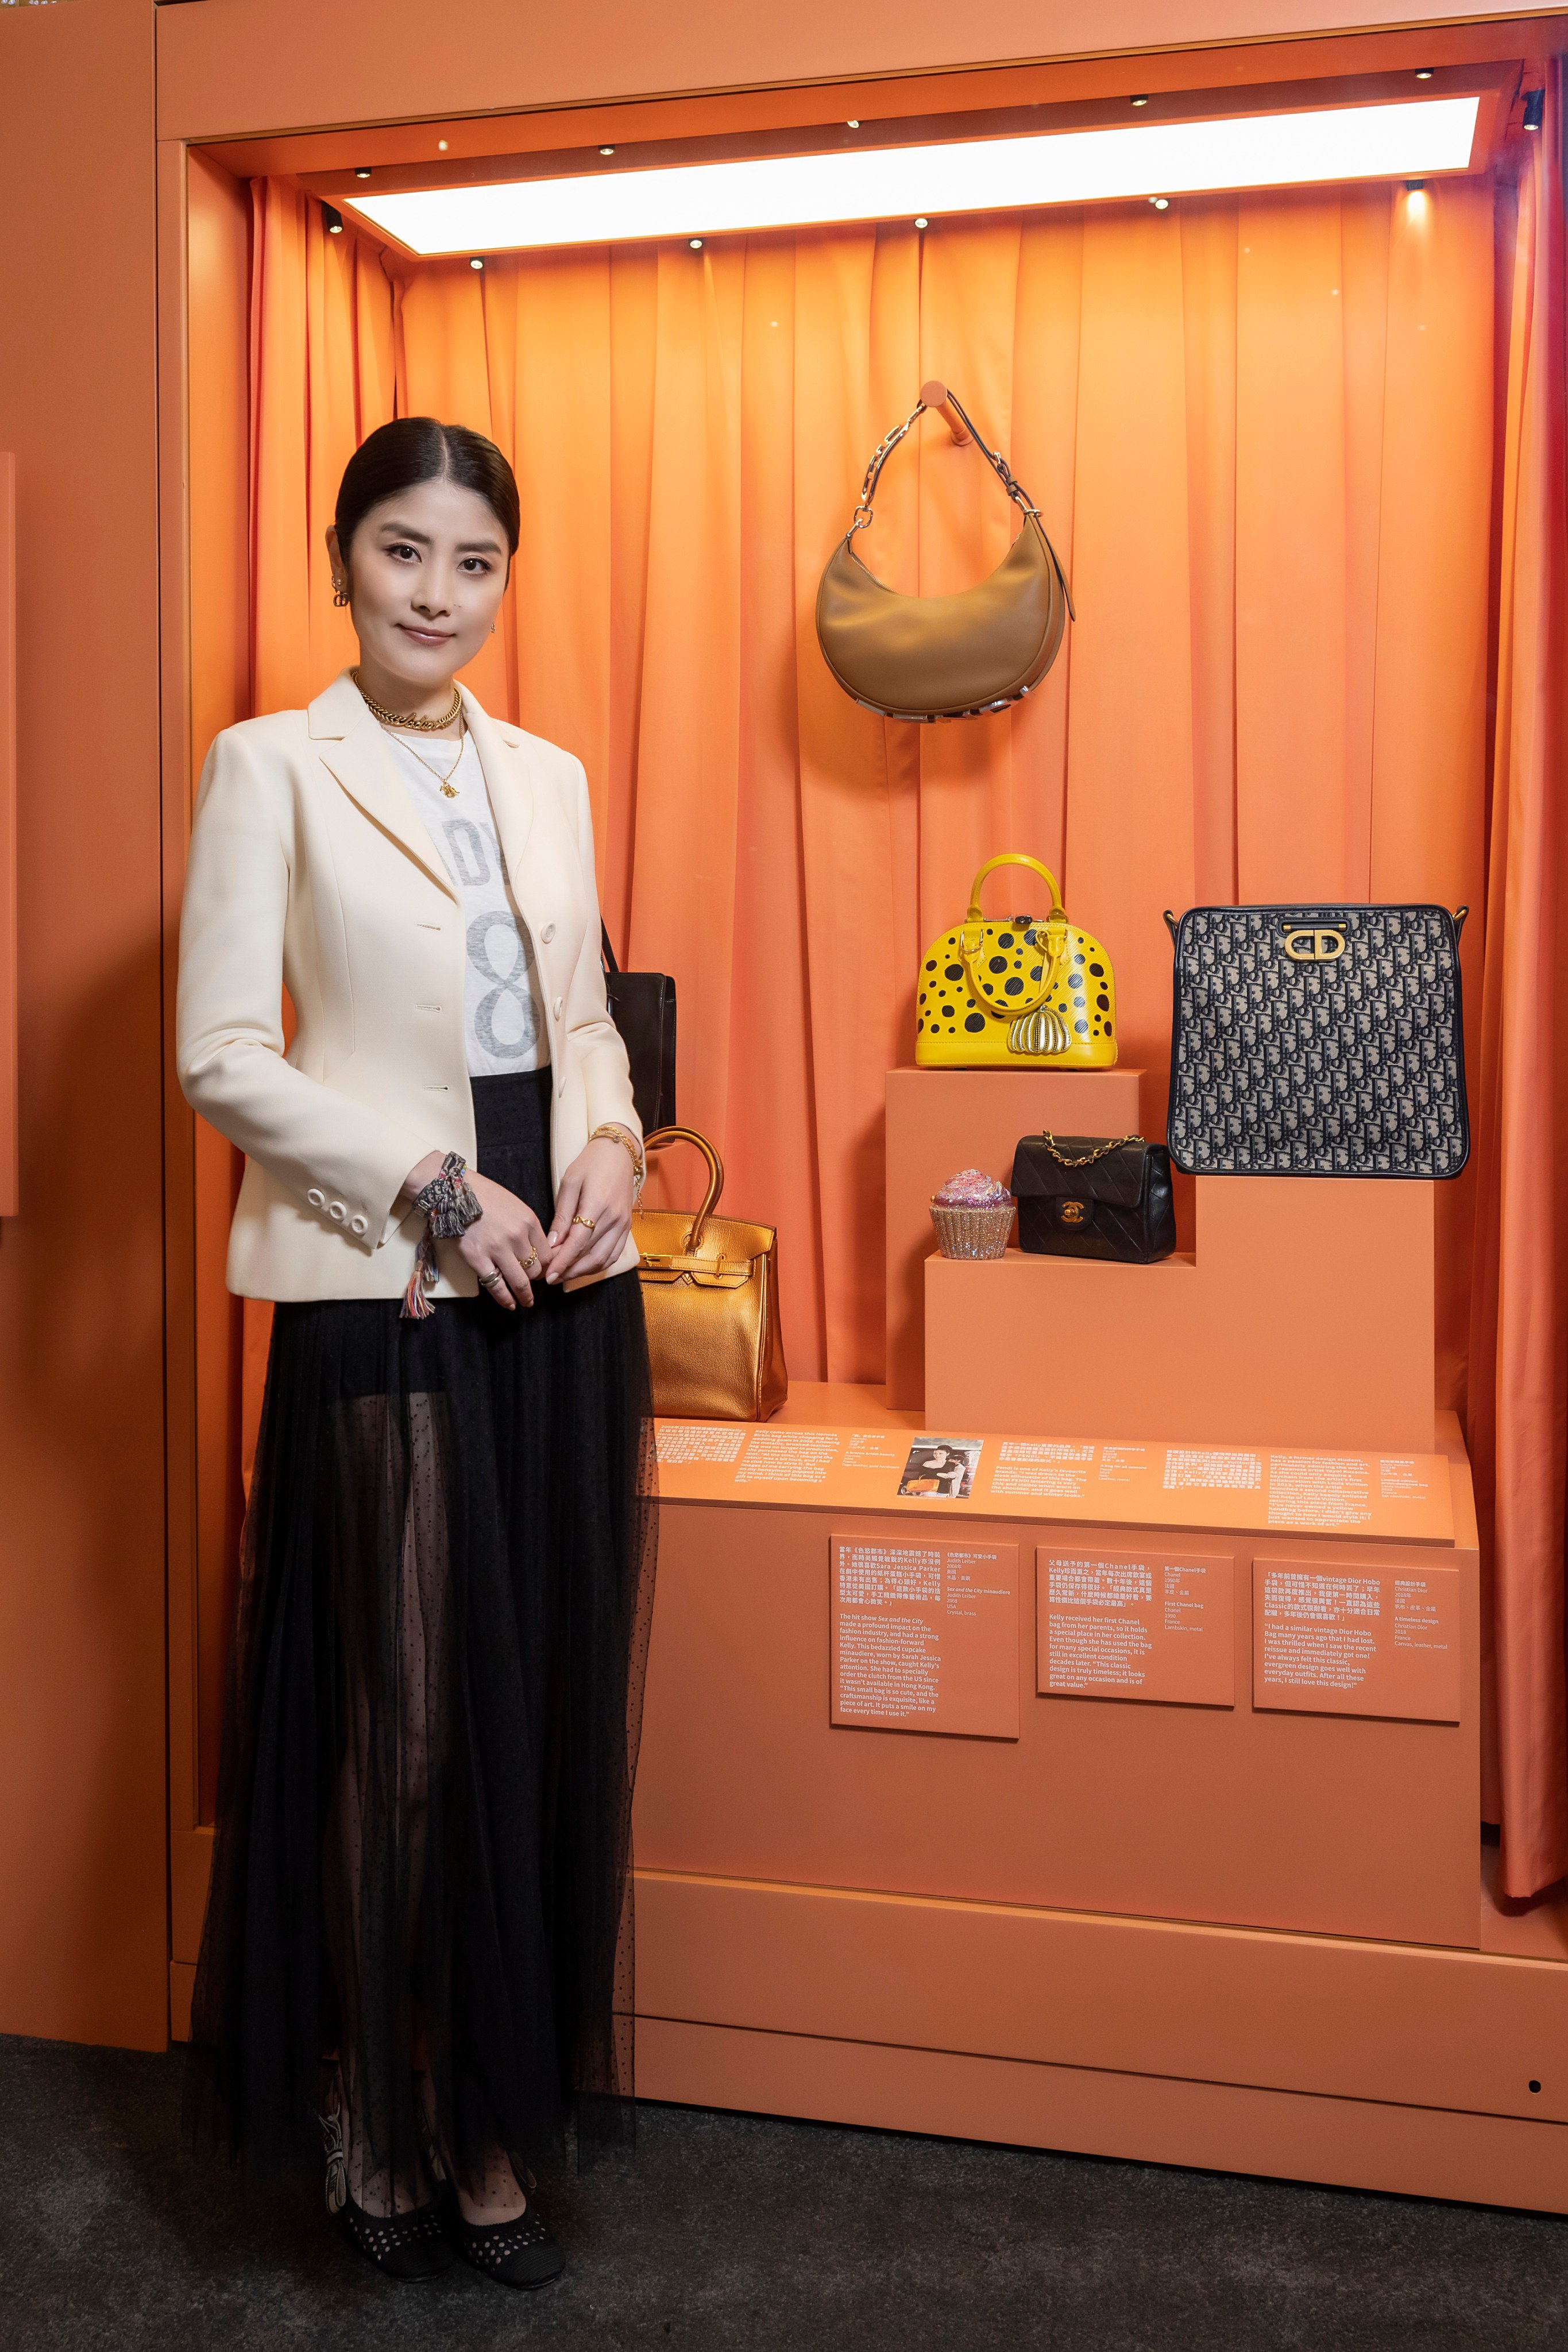 Hong Kong singer-actress Kelly Chen with handbags from her personal collection at the “Bags: Inside Out” exhibition, which includes iconic luxury handbags from brands including Hermes, Gucci and Fendi, at Pacific Place in Admiralty. Photo: Swire Properties